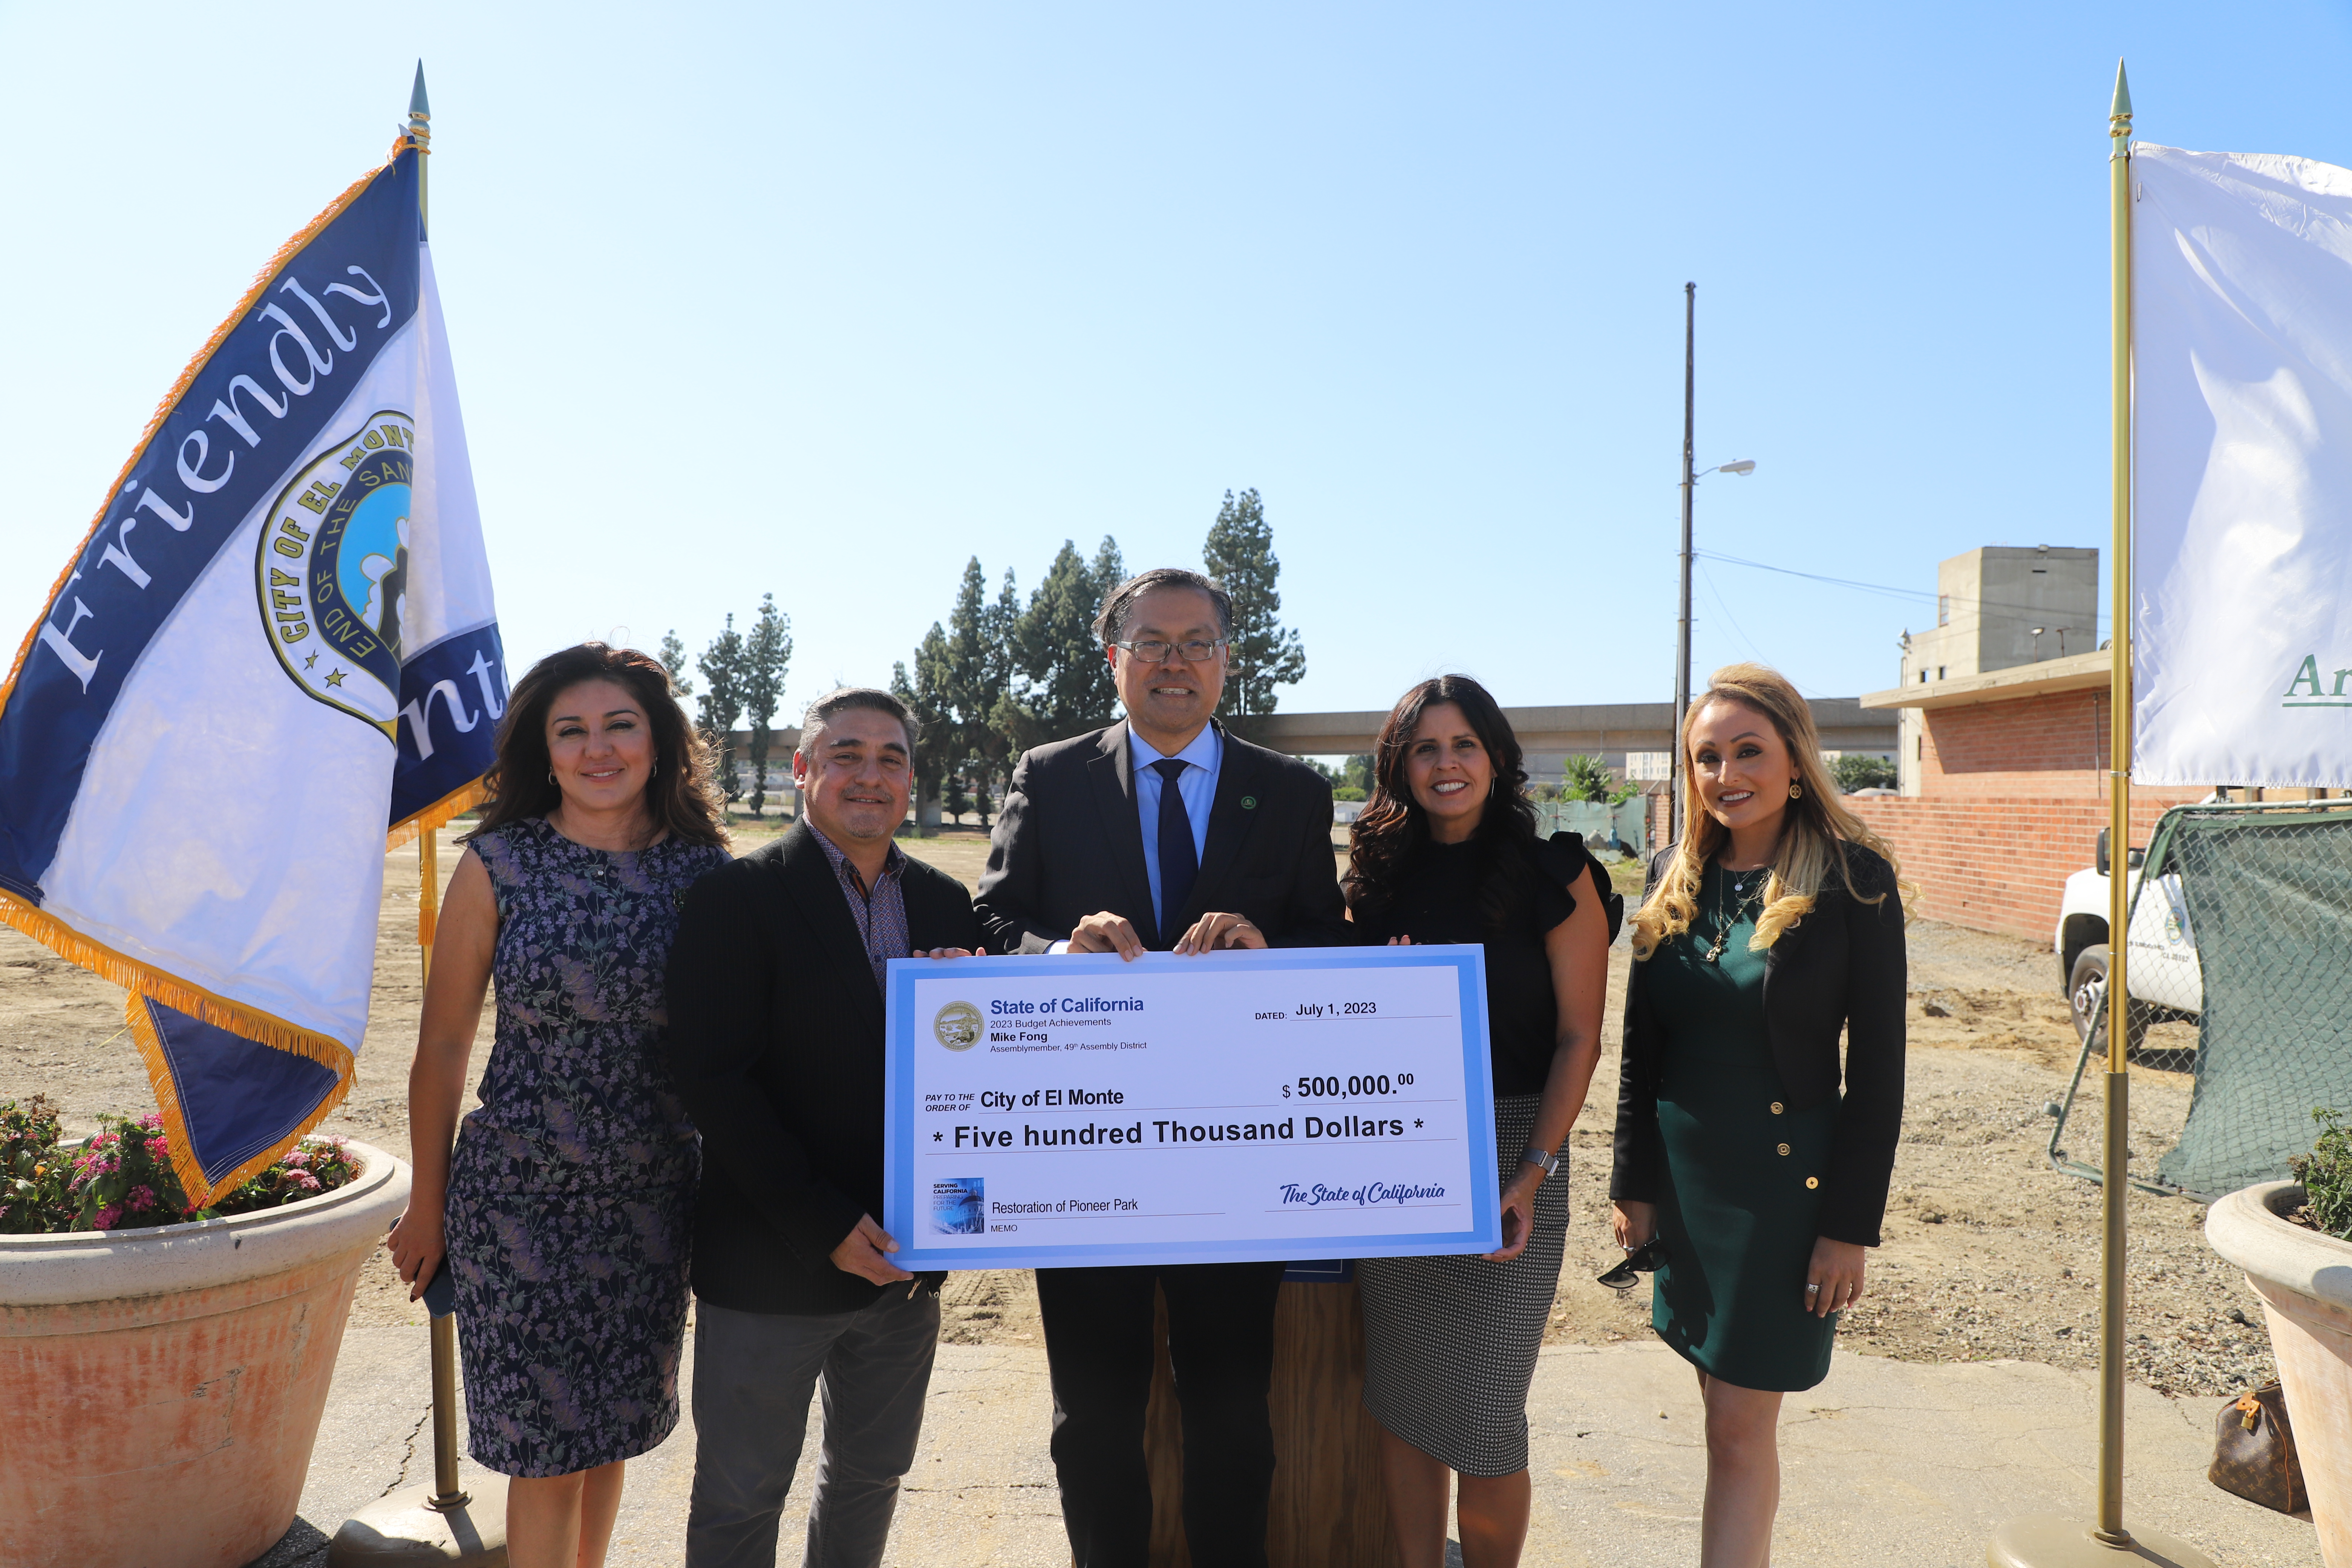 Assemblymember Fong presents a check to the City of El Monte